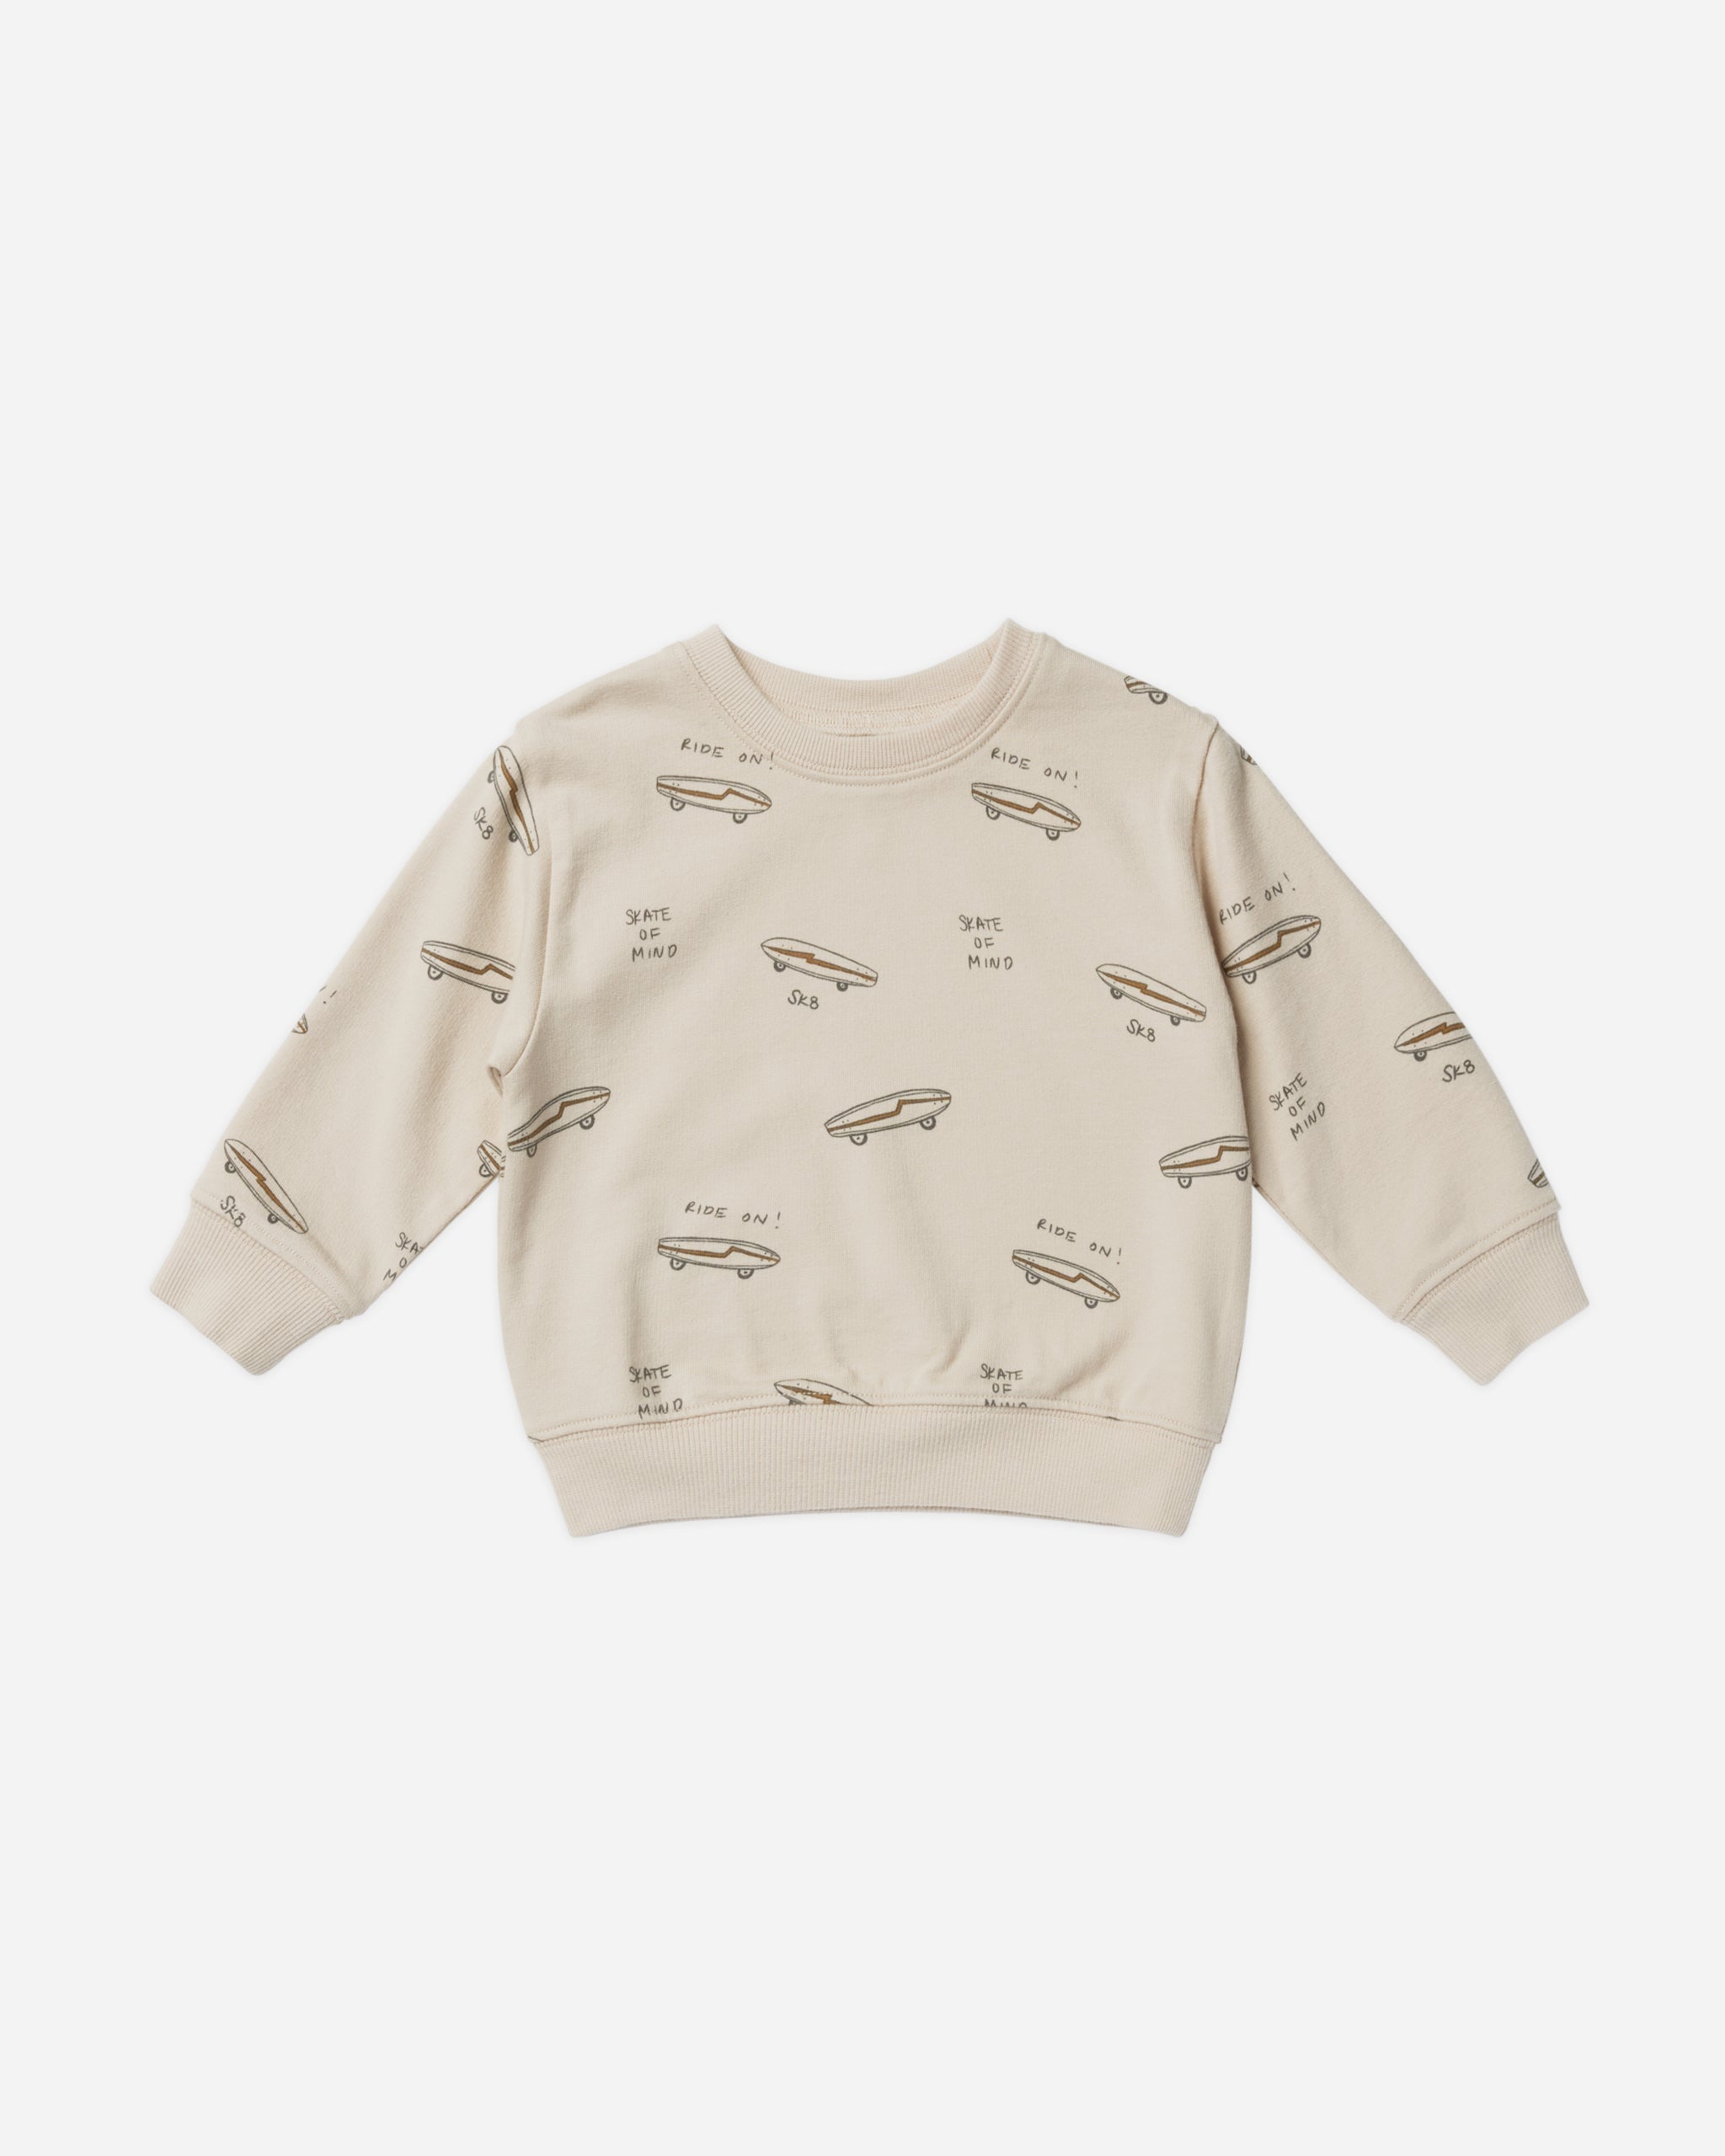 Sweatshirt || Skate - Rylee + Cru | Kids Clothes | Trendy Baby Clothes | Modern Infant Outfits |